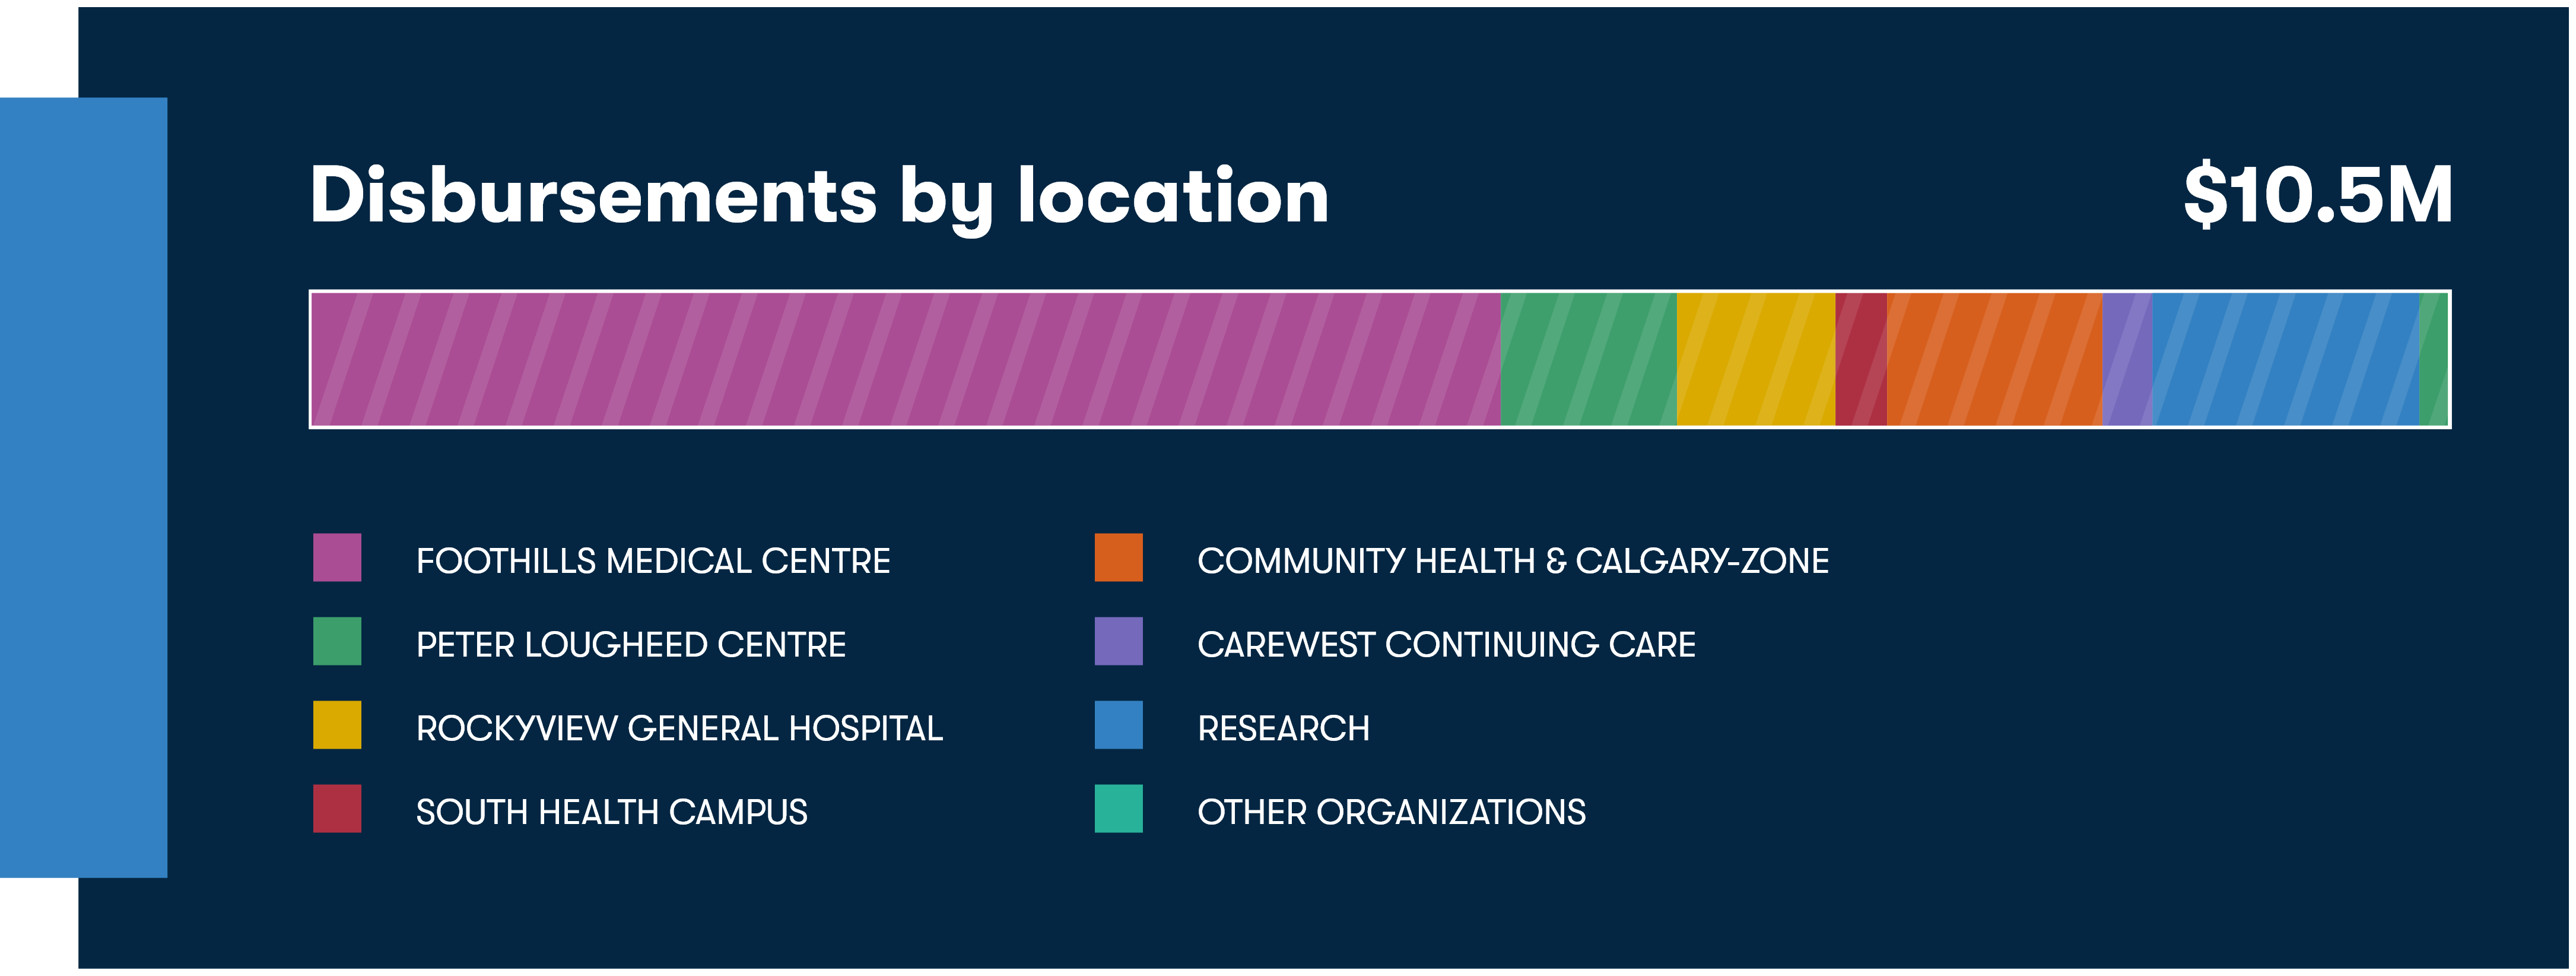 A graph showing a progress bar saying disbursements by location and $105M with the four different Calgary adult hospitals shown in the bar, Community Health & Calgary-Zone, Carewest Continuing Care, Research, and Other Organizations as the other disbursements